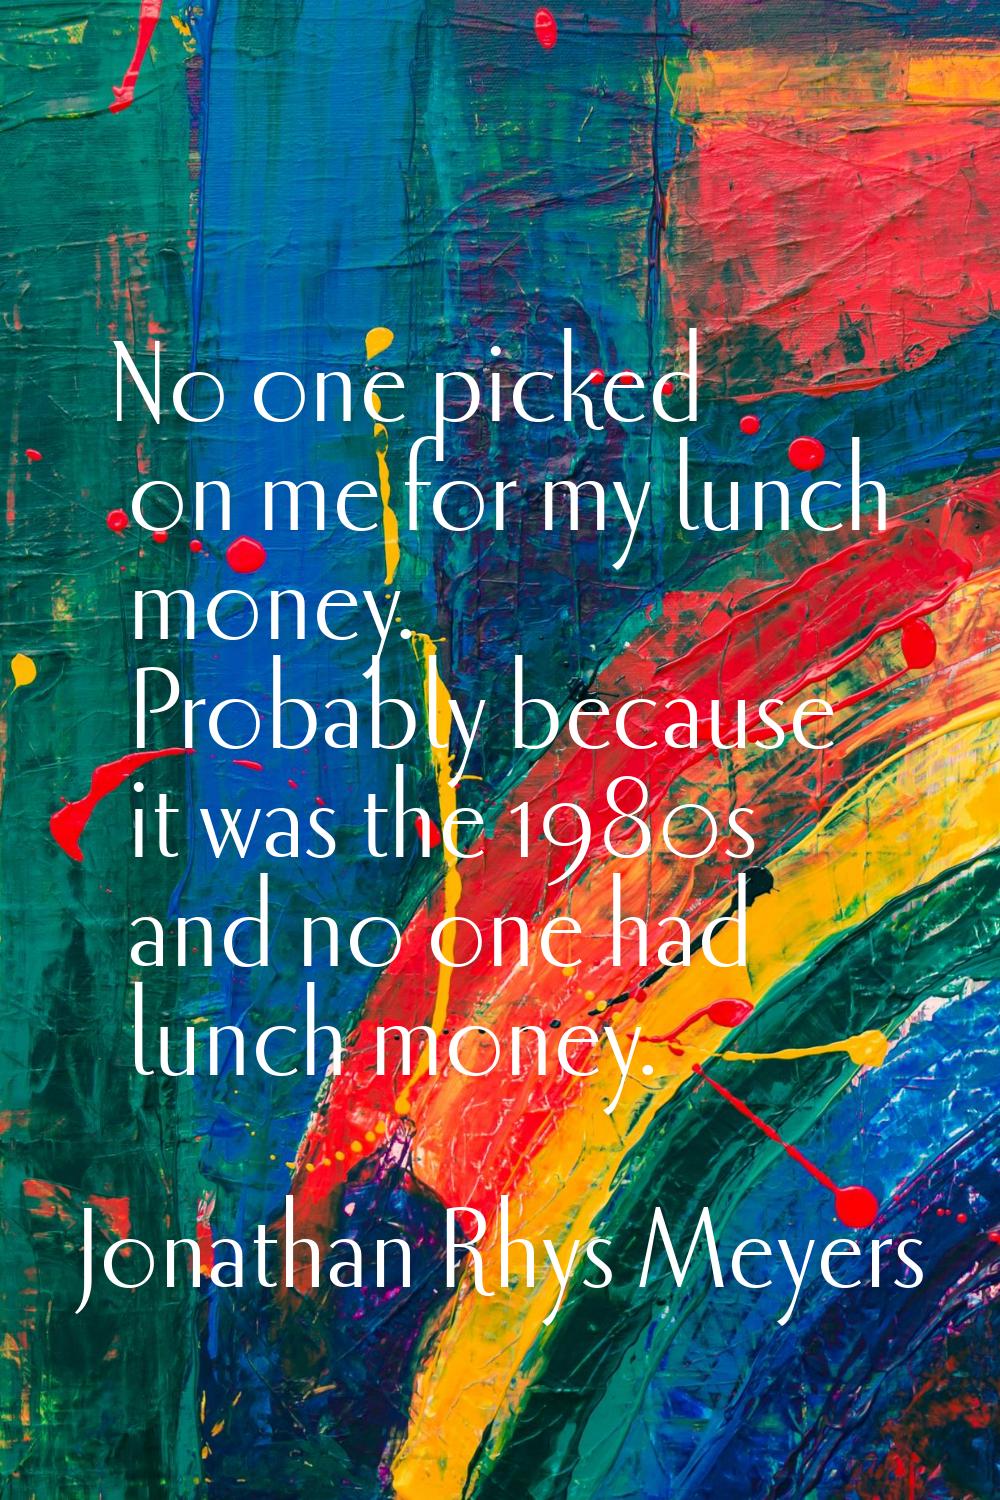 No one picked on me for my lunch money. Probably because it was the 1980s and no one had lunch mone